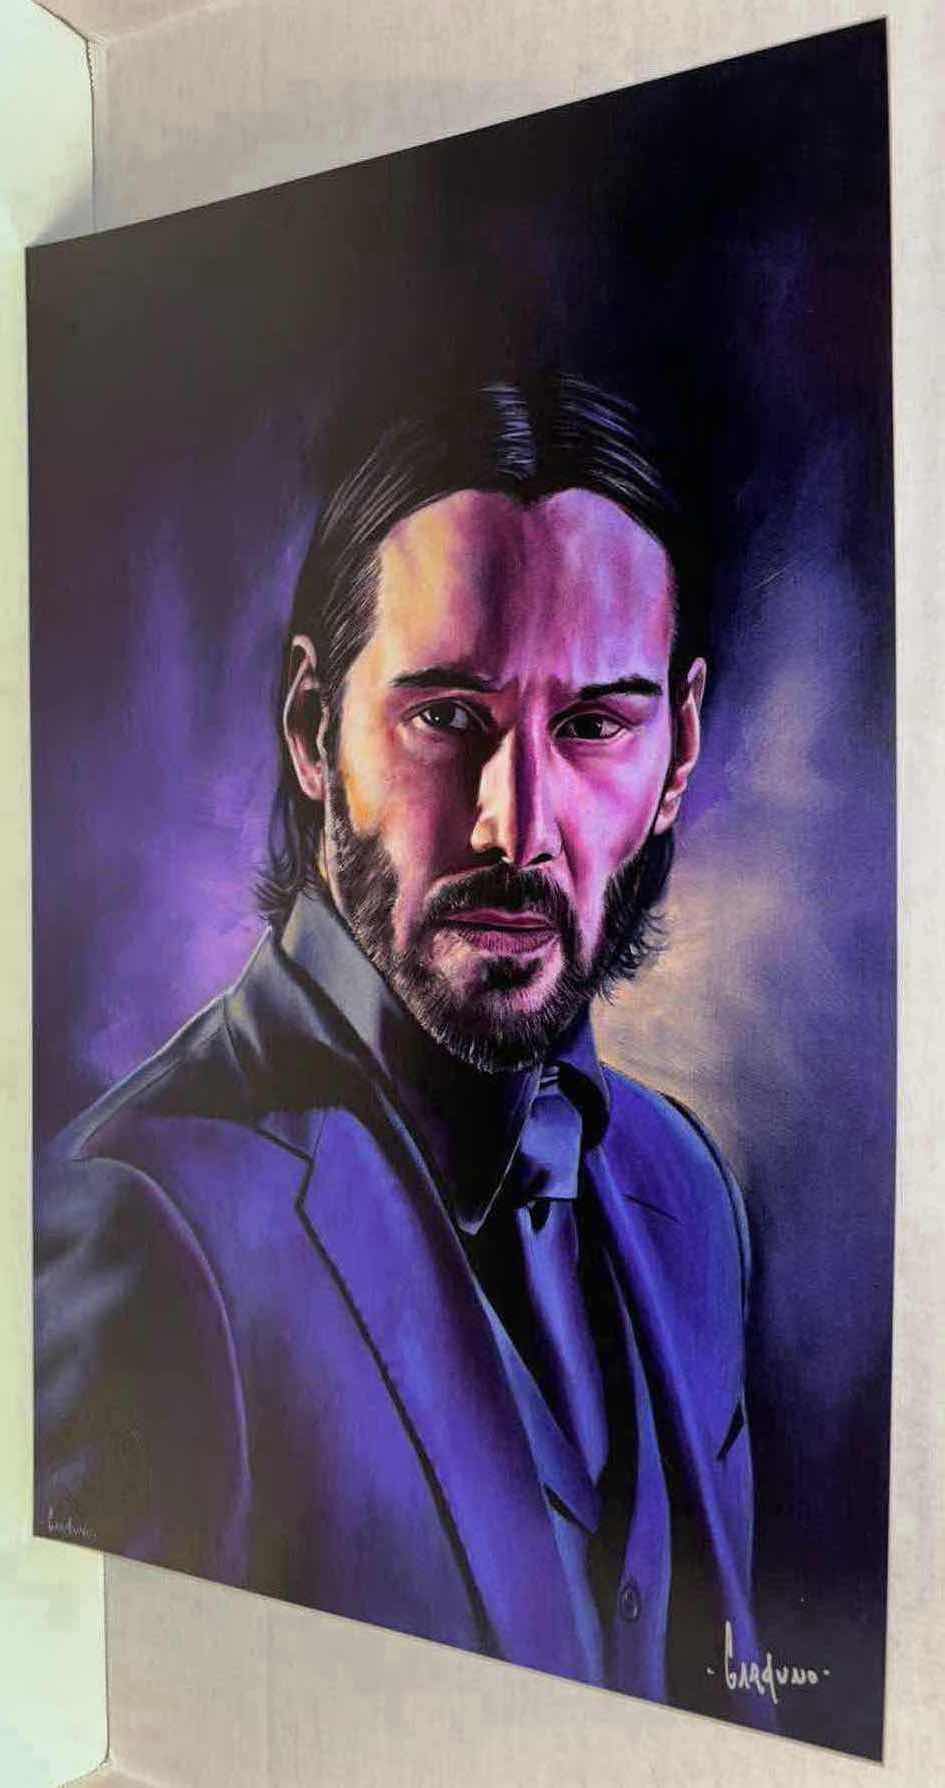 Photo 1 of VICTOR GARDUNO JOHN WICK 11” X 17” INFINITY GLOSS UNFRAMED PRINT W EMBOSSED SEAL, DIGITAL SIGNATURE & OFFICIAL SIGNATURE W COA INCLUDED, STORED IN A RIGID PRINT PROTECTOR SLEEVE